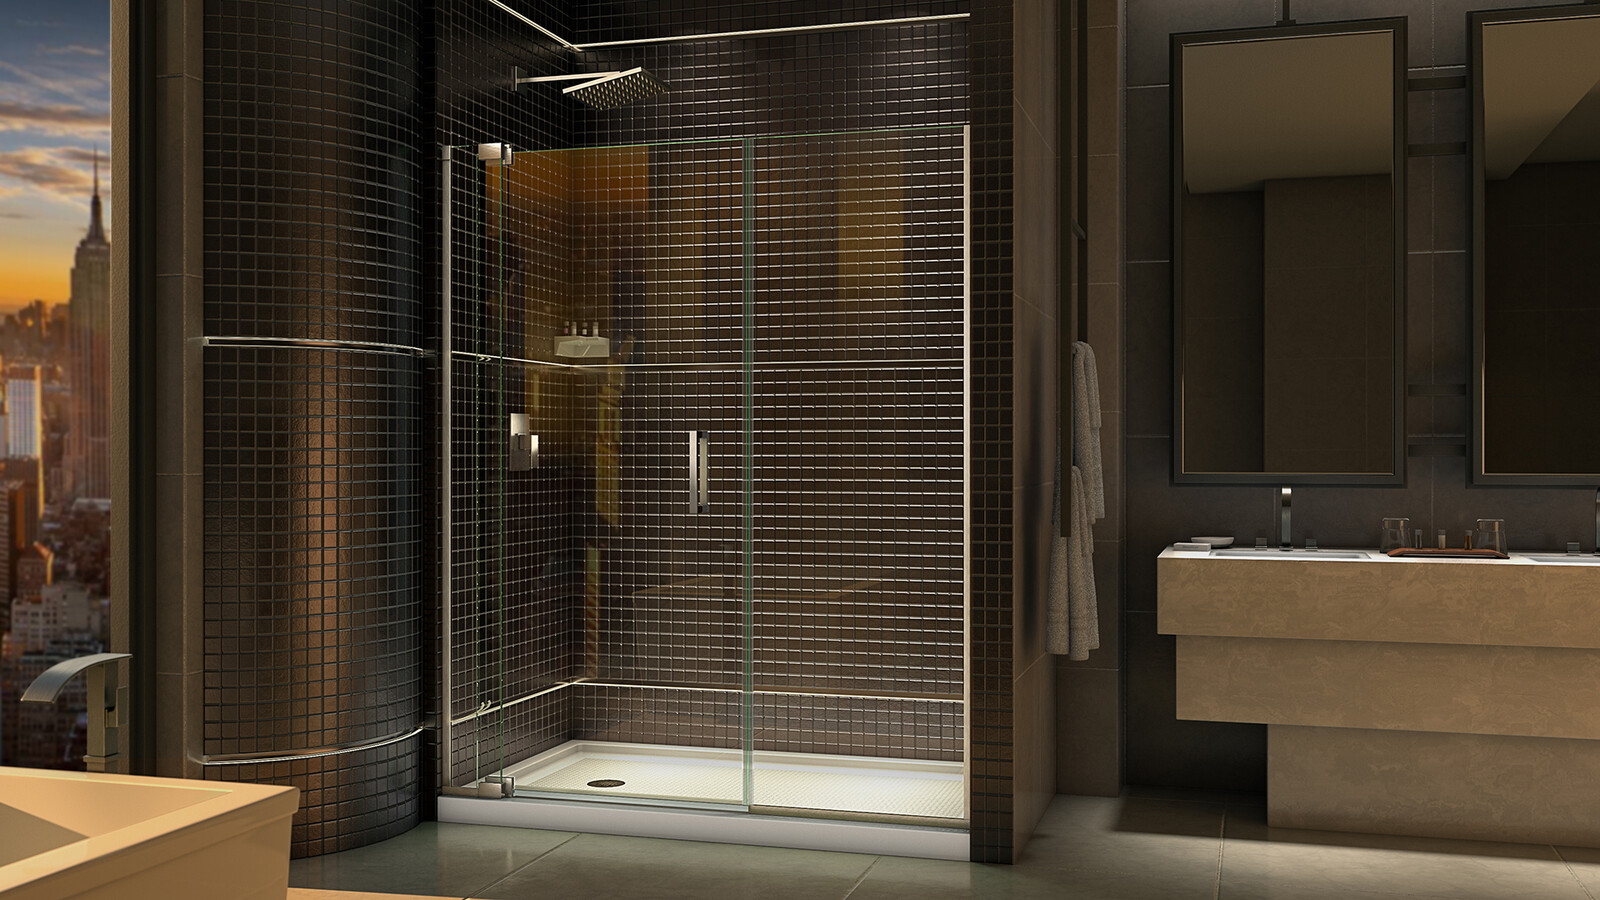 Rendered in Vray. Responsible For: room modeling and layout, lighting, texturing walls, ceiling, floor, shower and shower door. 